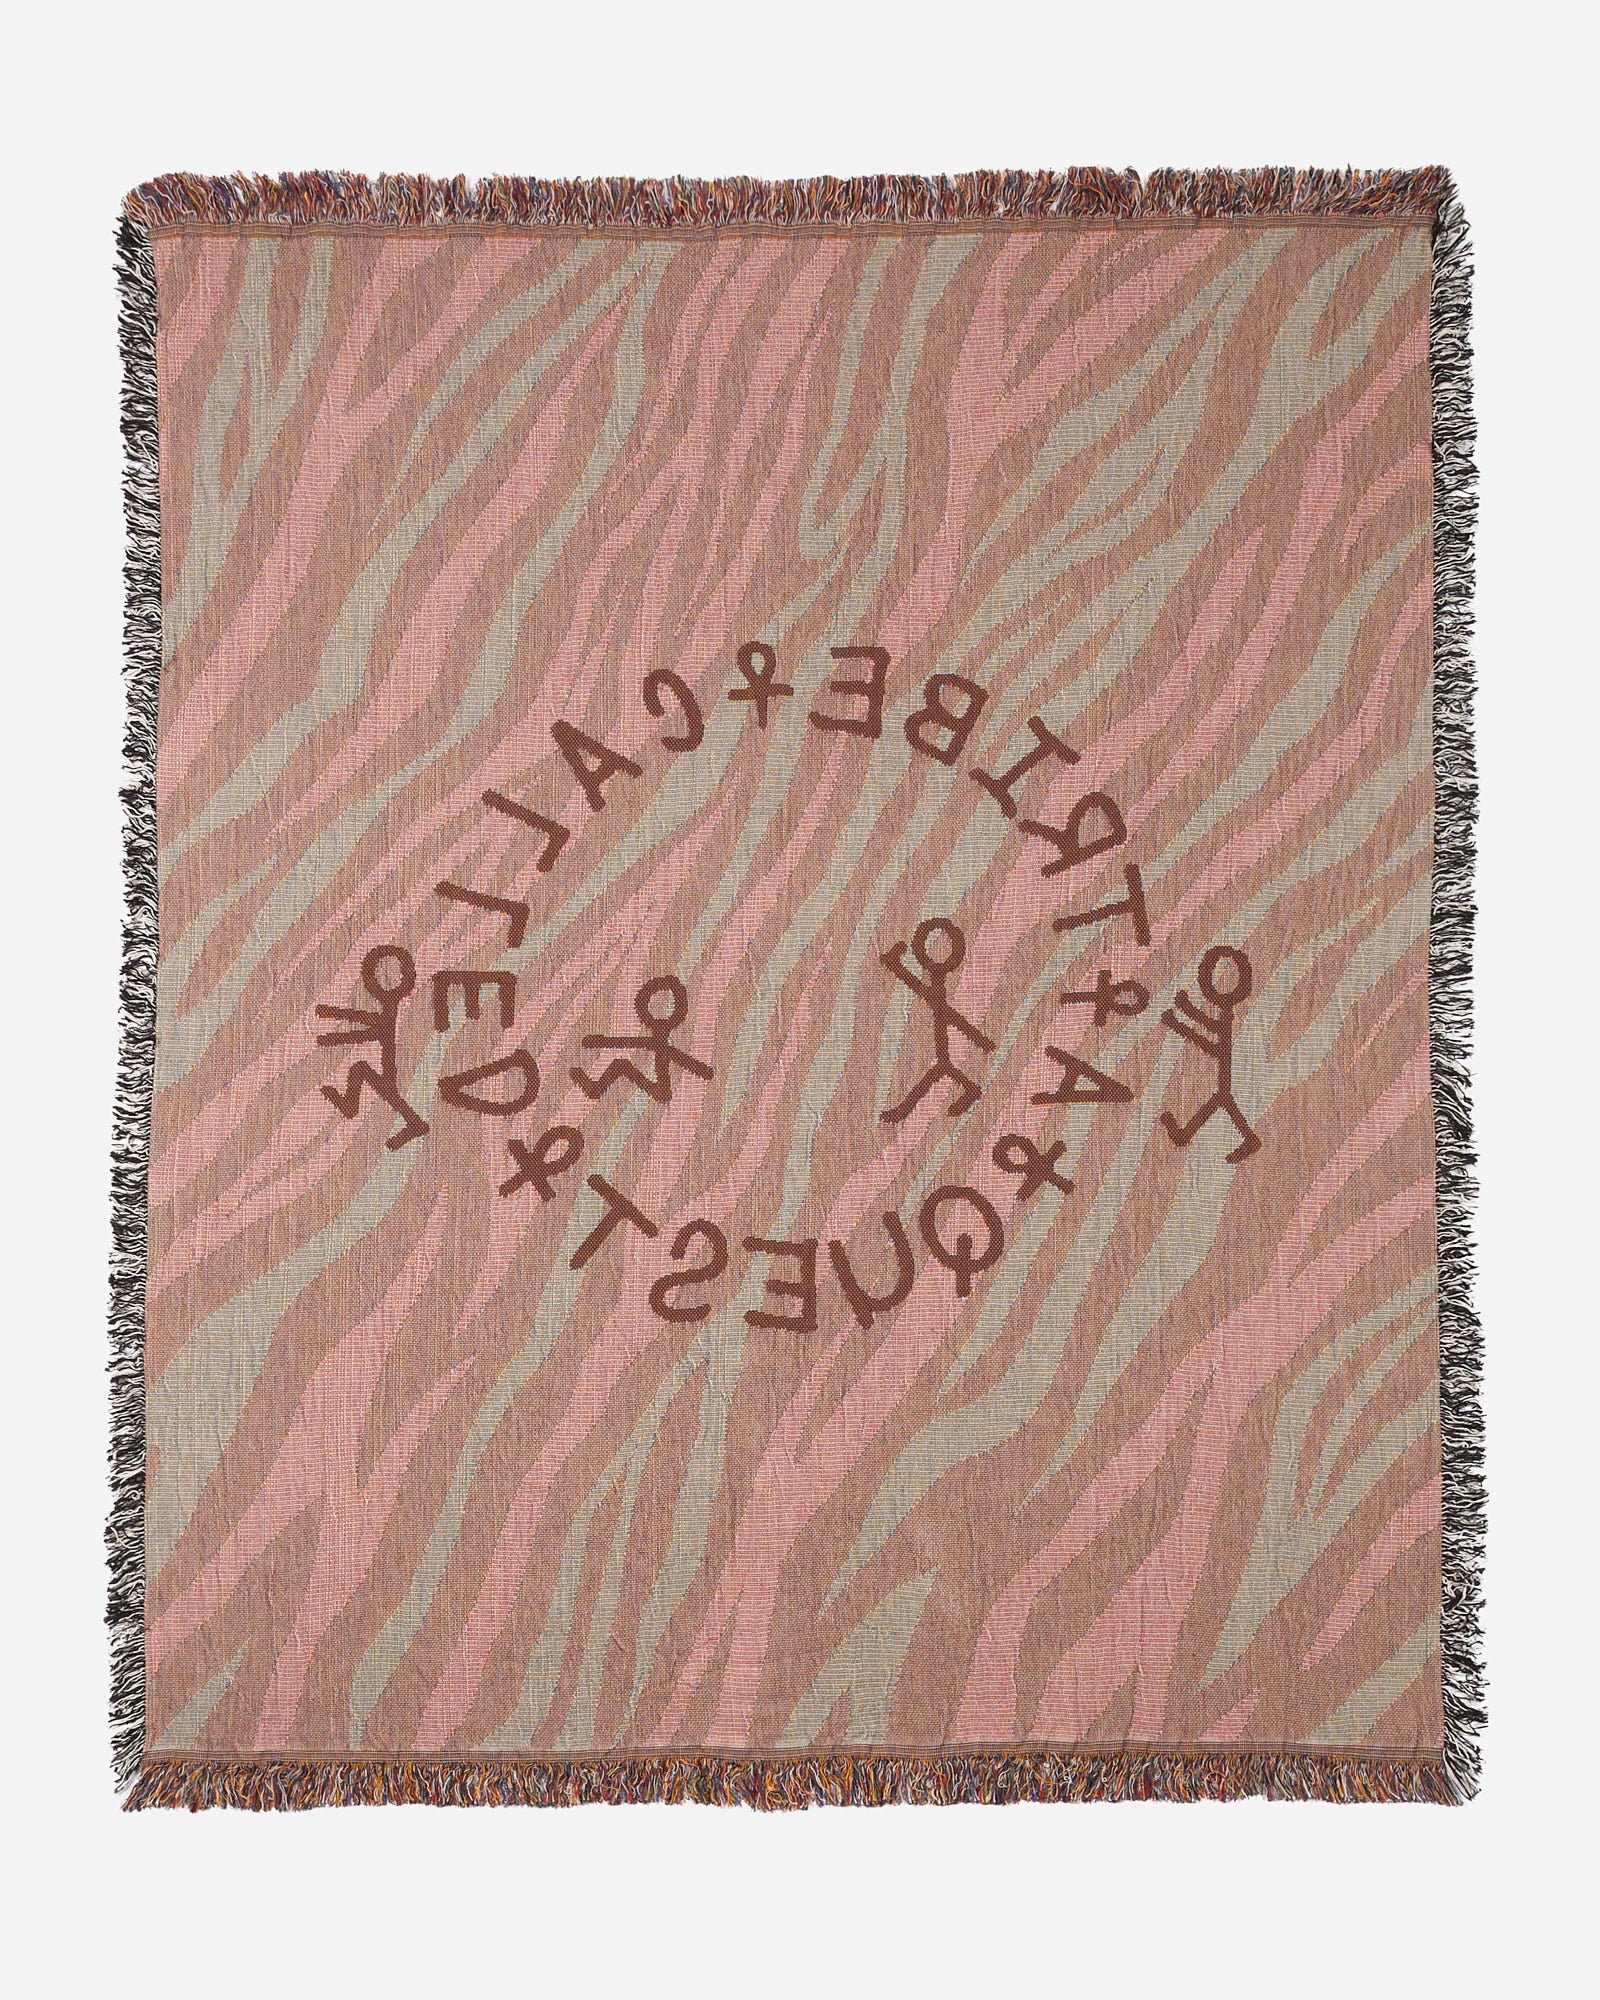 ATCQ Striped Woven Tapestry